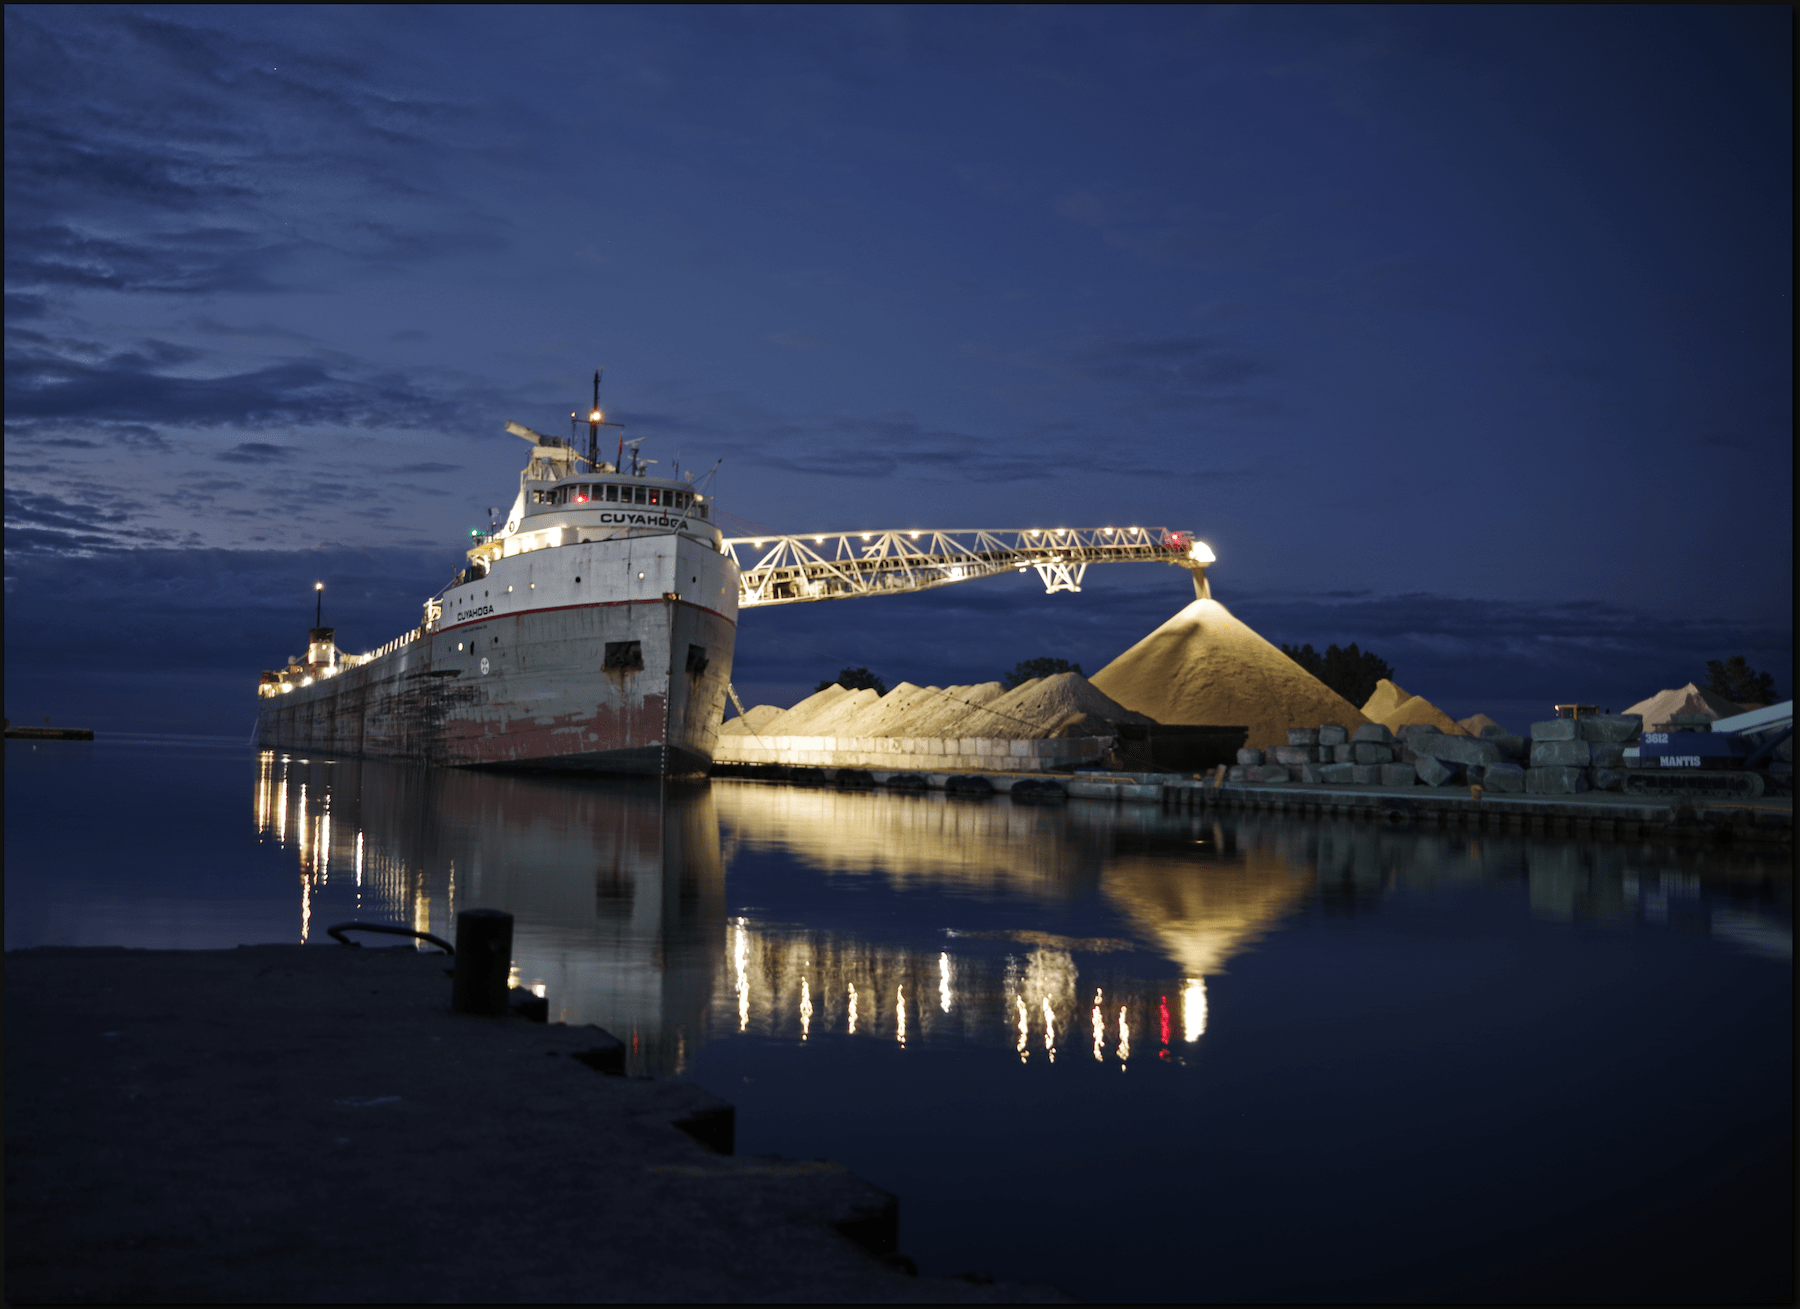 Great lakes freighter discharging aggregate at night in Ontario.